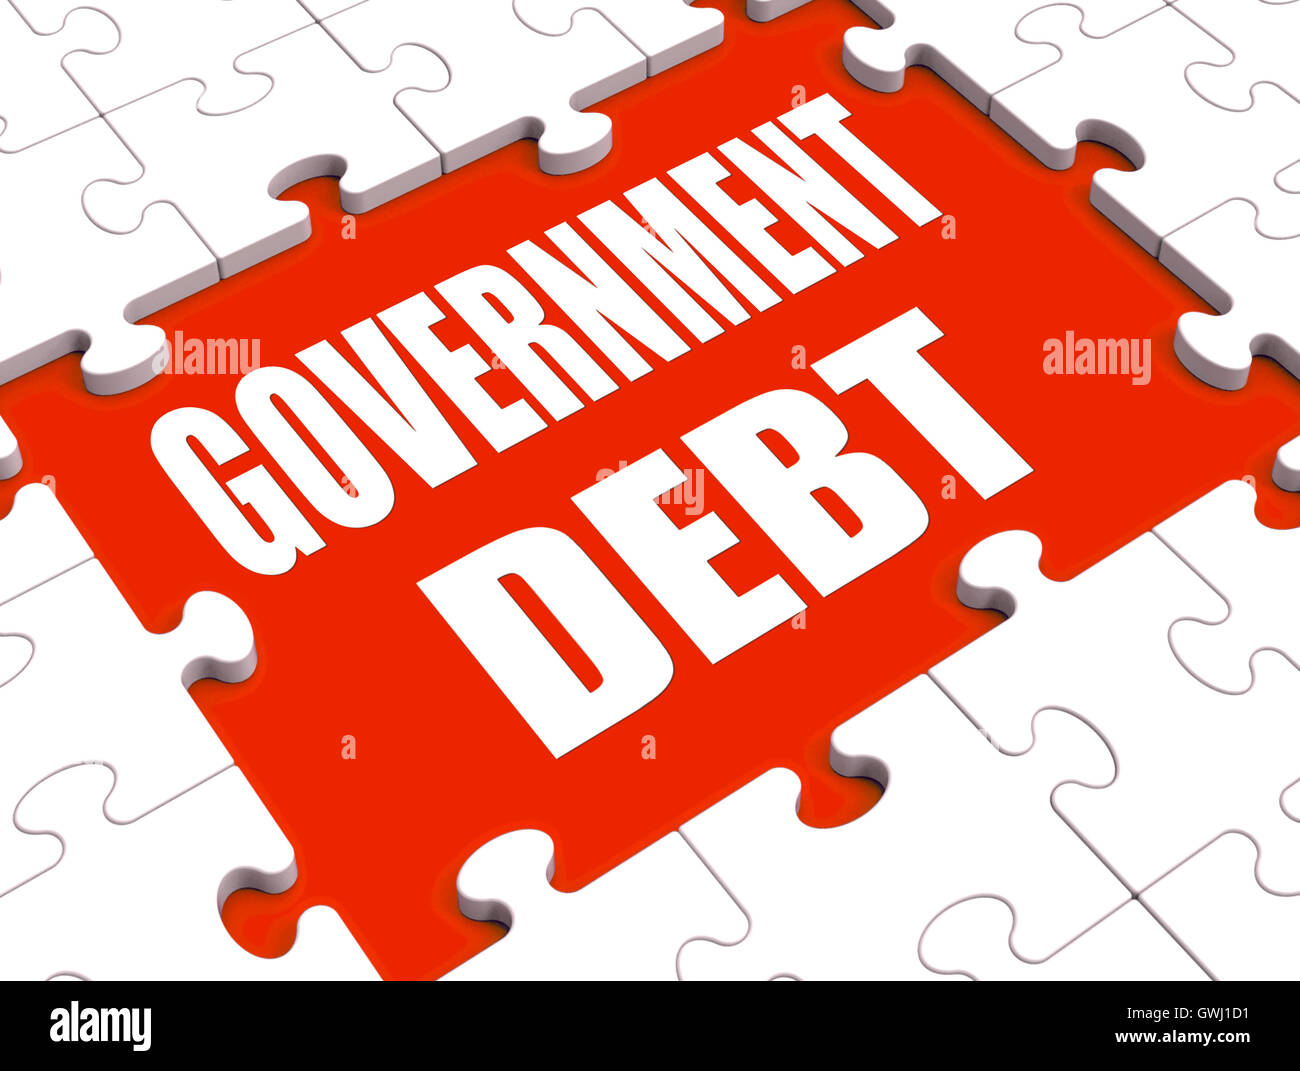 Government Debt Puzzle Shows Nation Penniless And Bankrupt Stock Photo